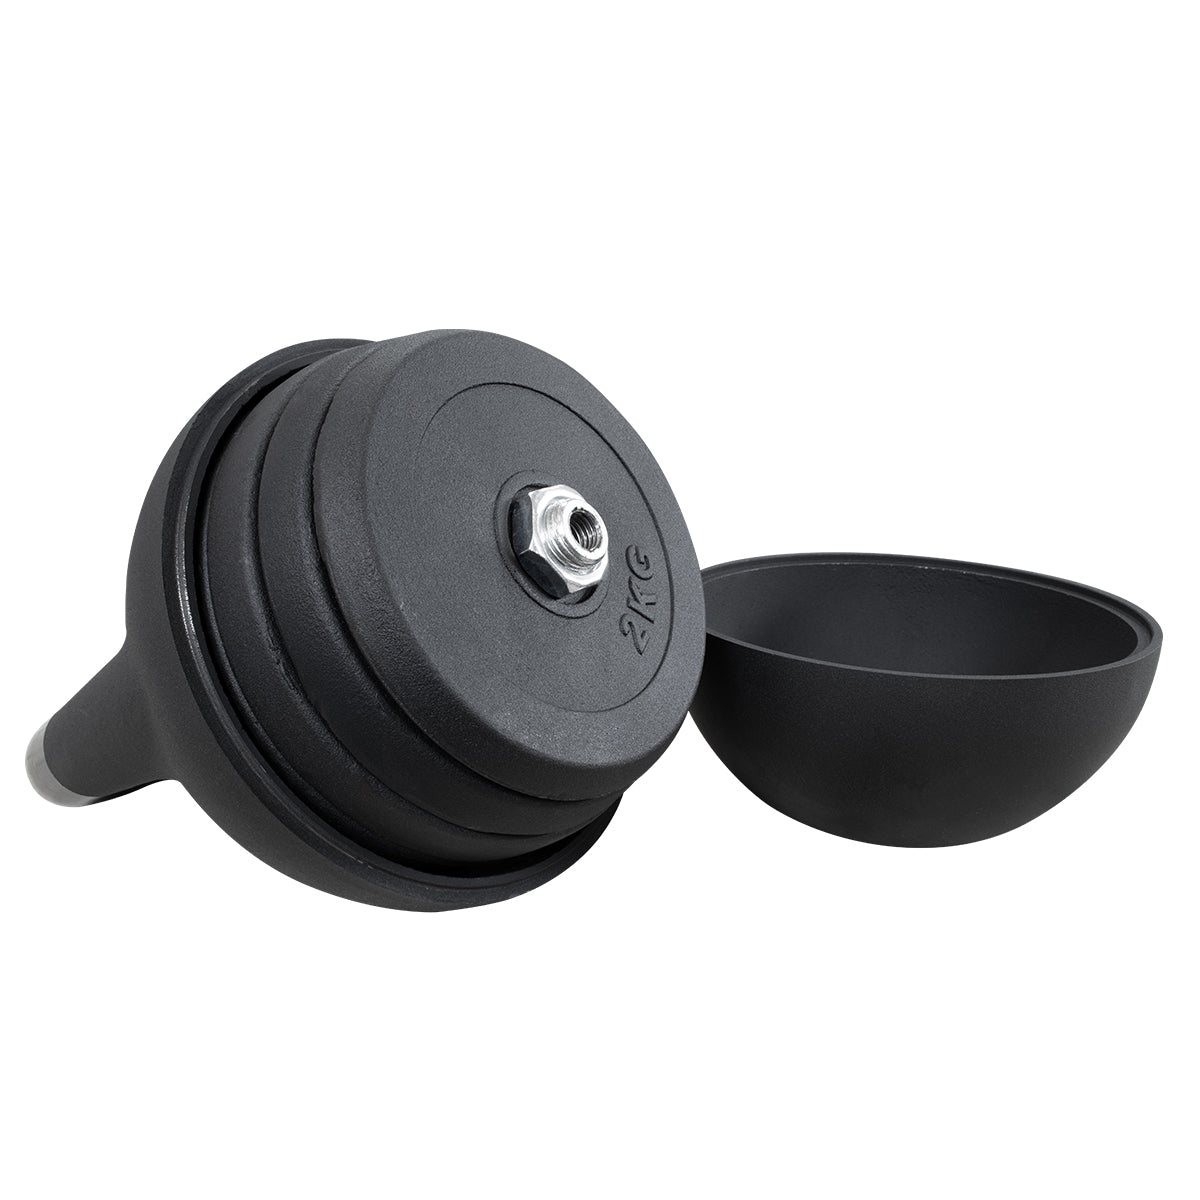 Adjustable Kettlebell 12kg-32kg, Competition Style - SHIPPING 23-28TH MAY, PREORDER - Strength Shop